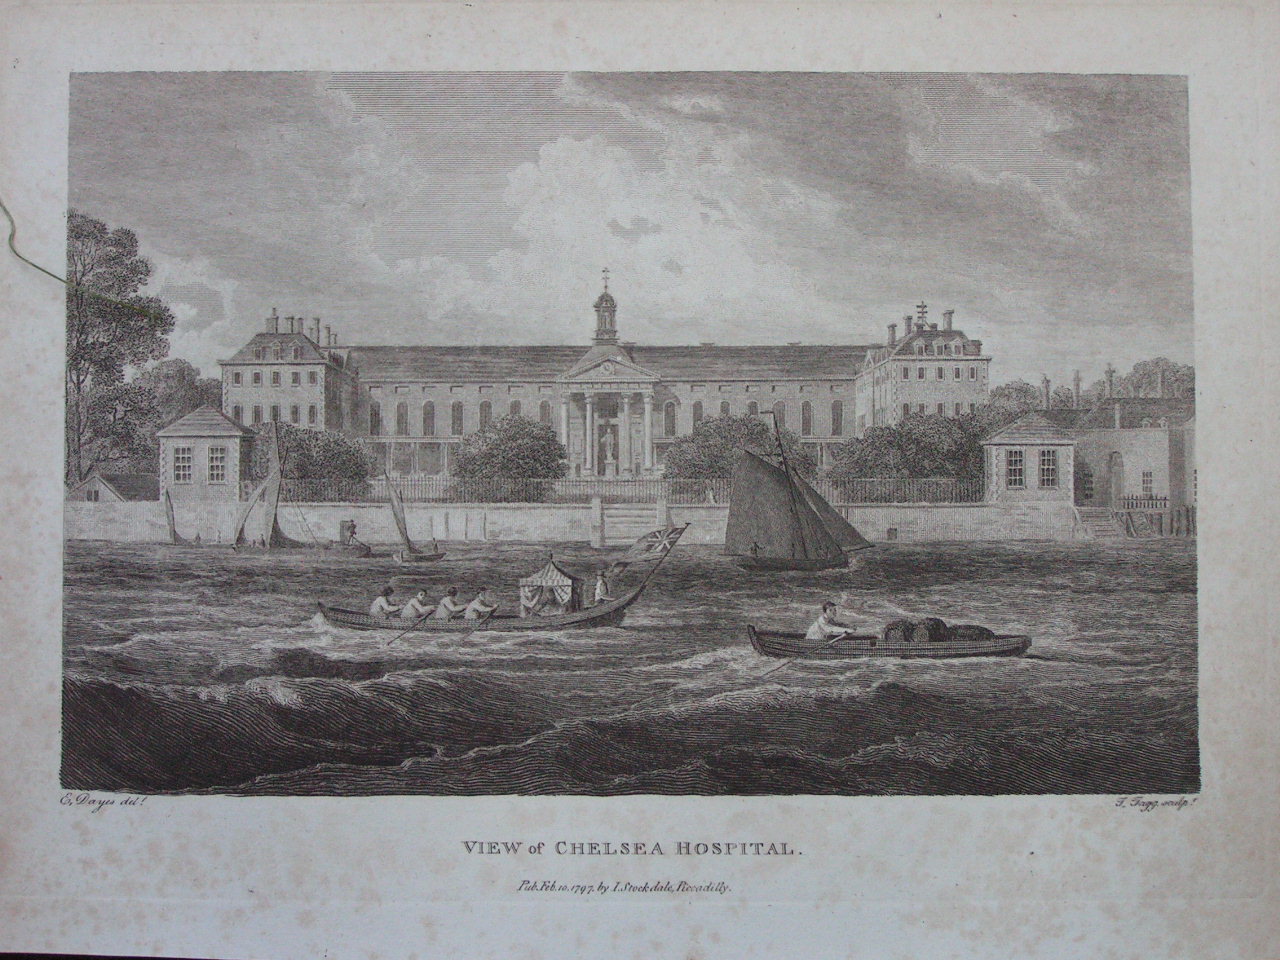 Print - View of Chelsea Hospital. - Tagg